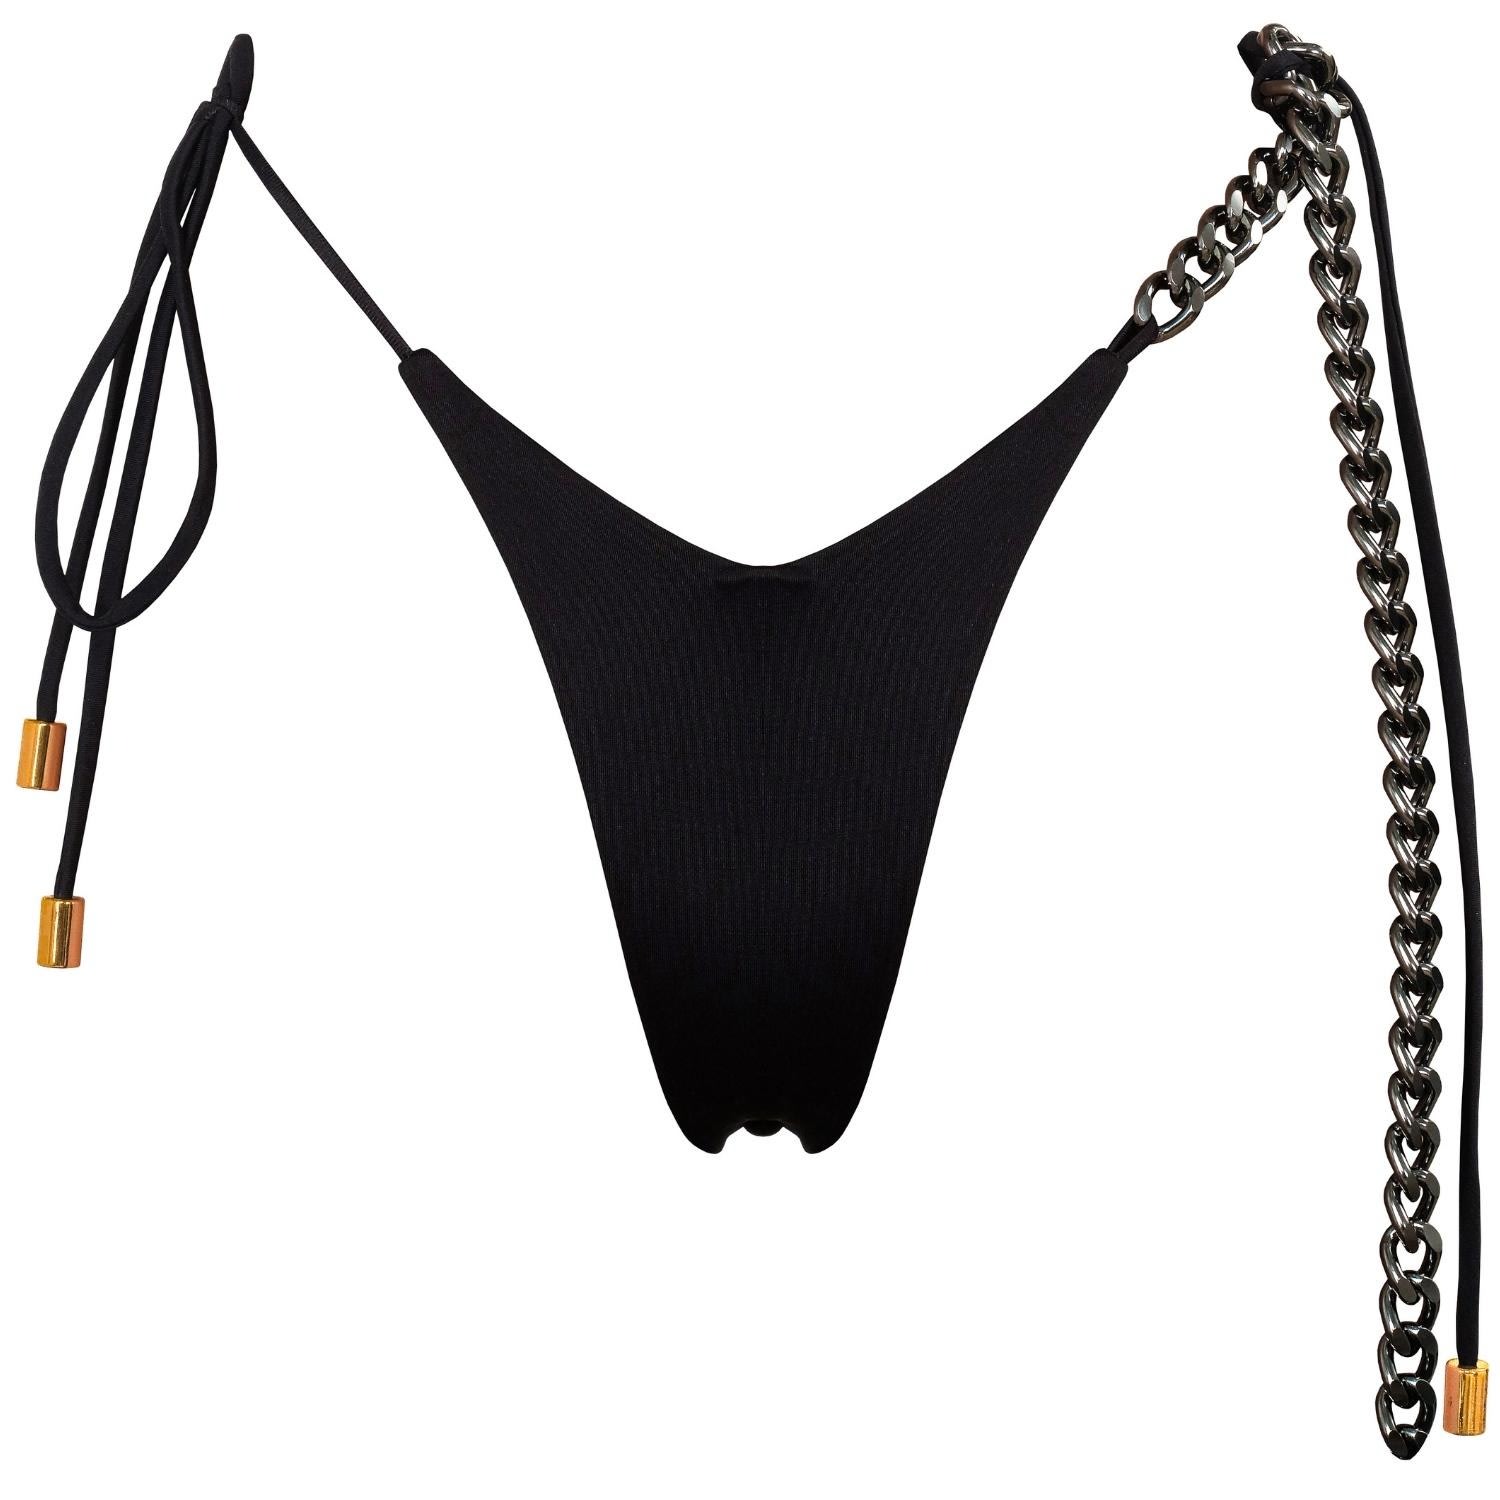 Women's Lisome Bikini Bottom With Black Decorative Metal Chain And Golden Details In Black Extra Small ANTONINIAS